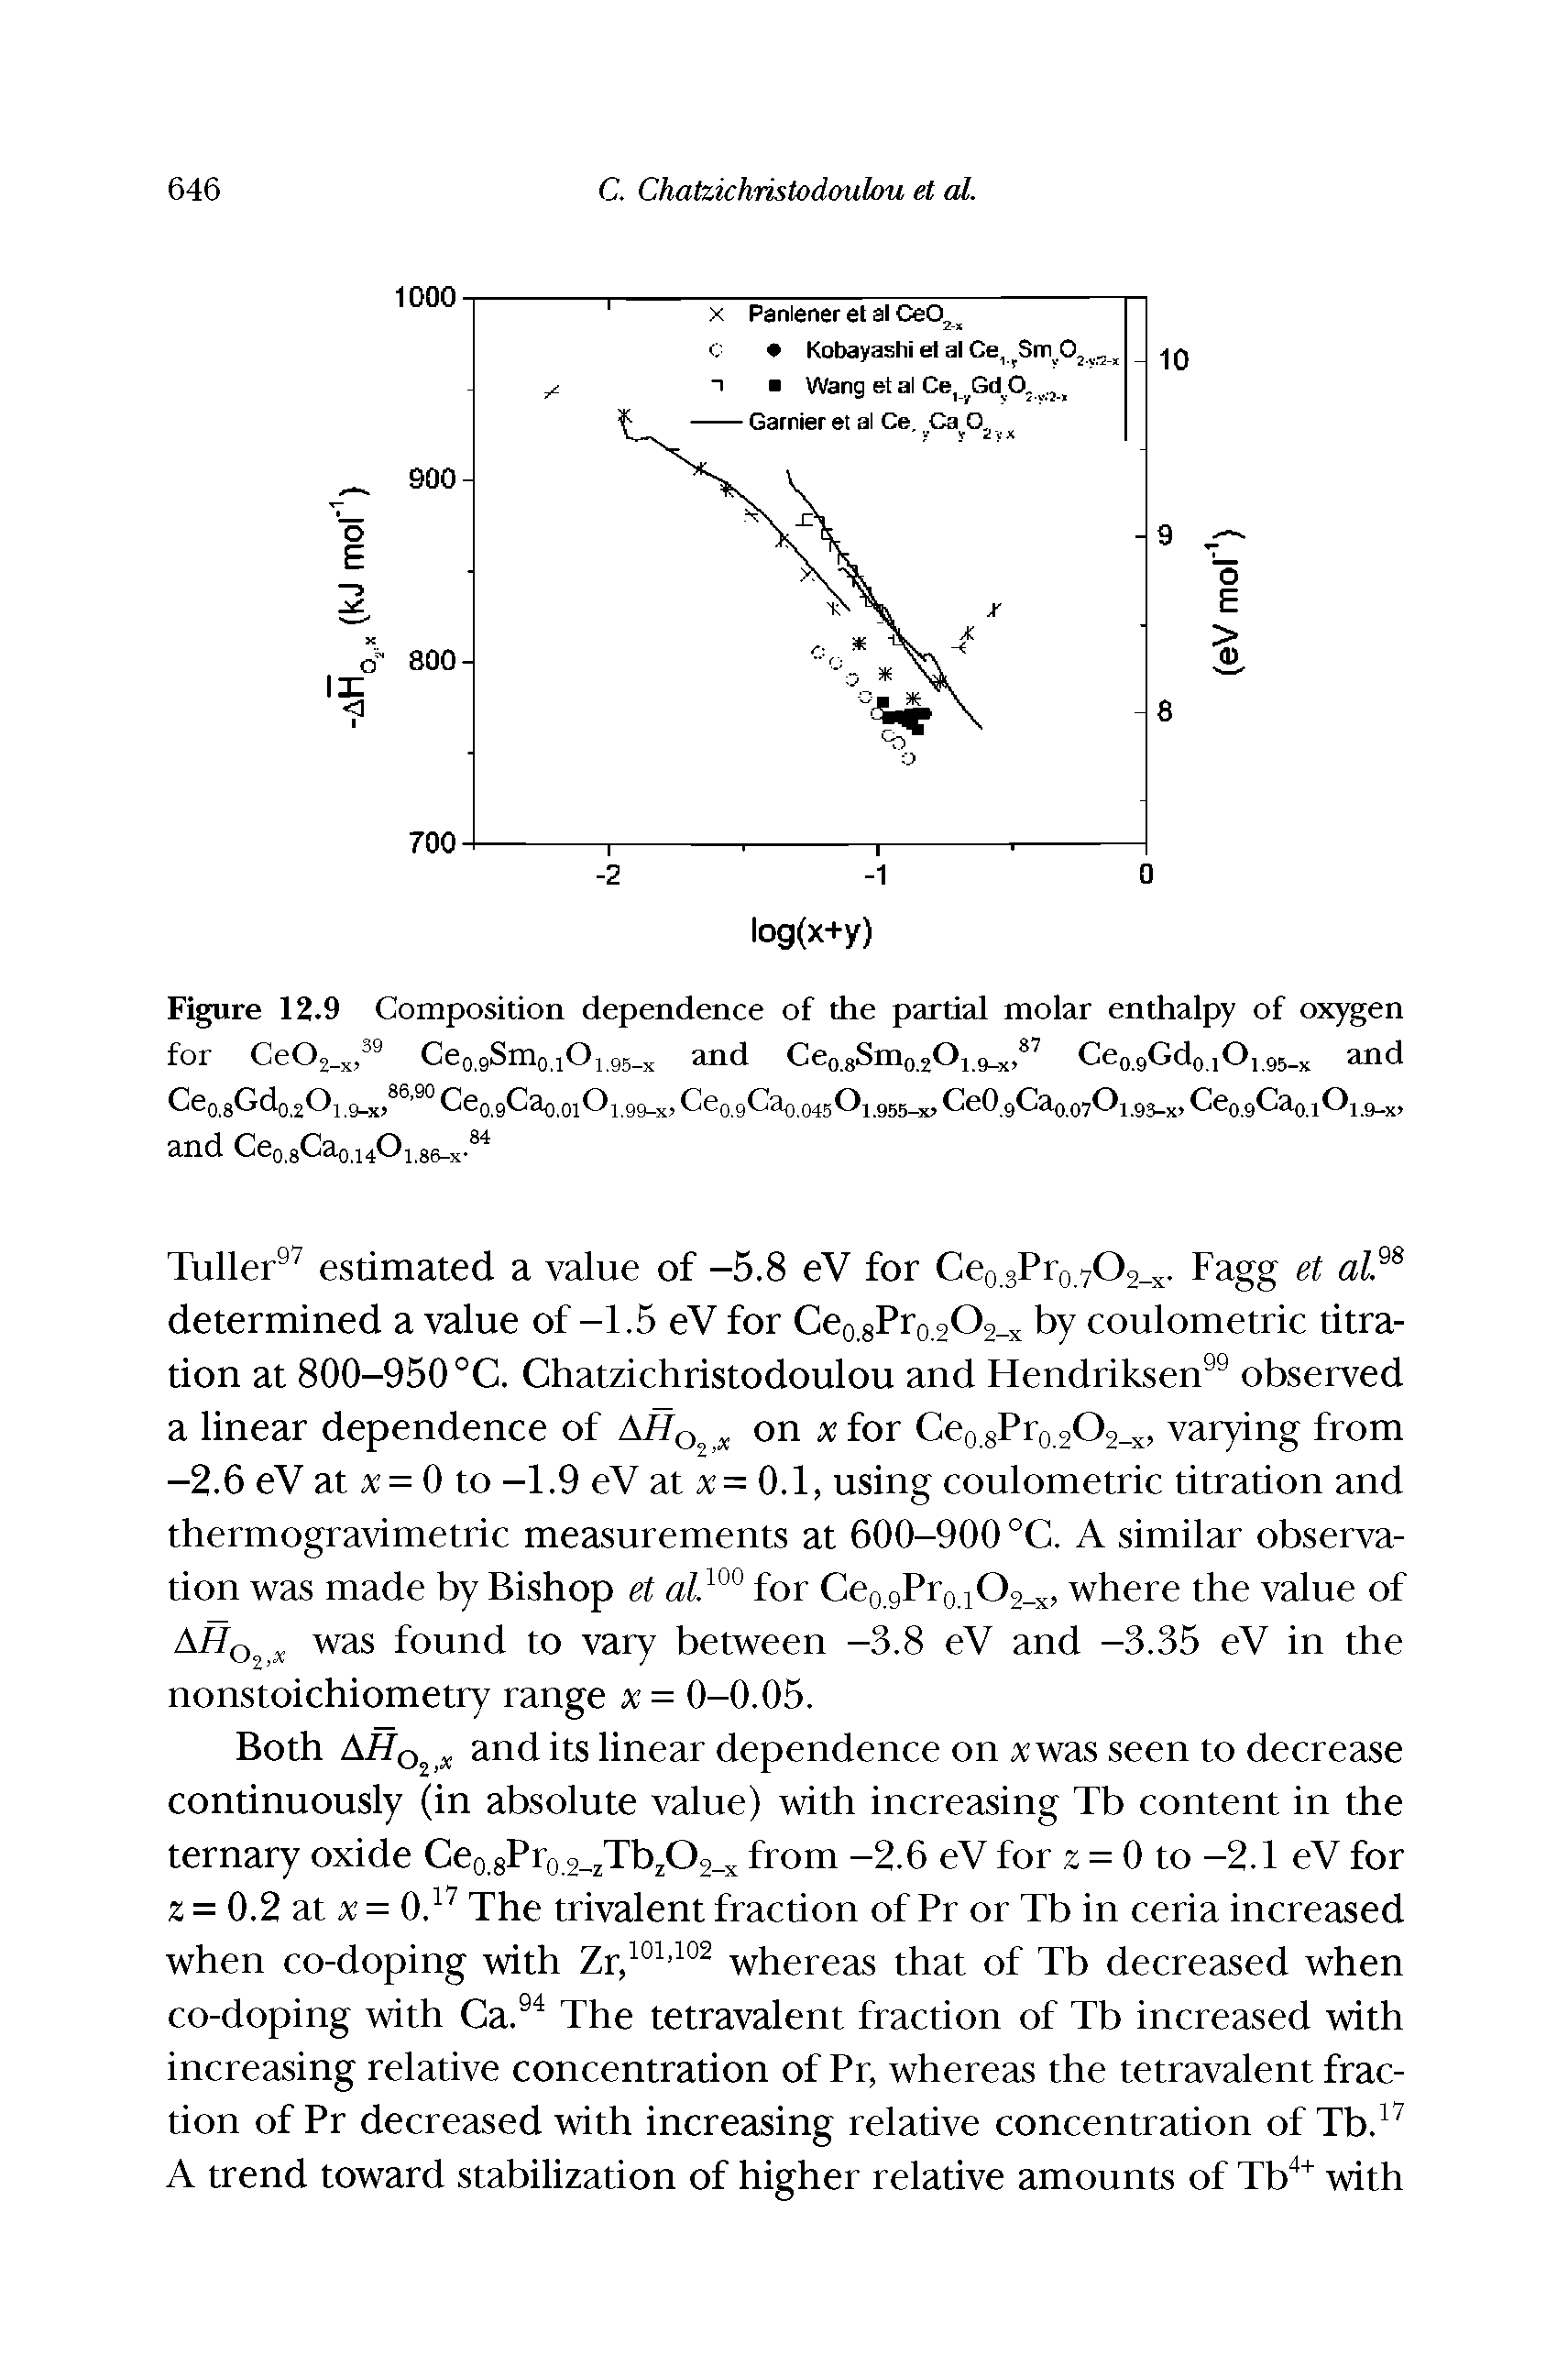 Figure 12.9 Composition dependence of the partial molar enthalpy of oxygen...